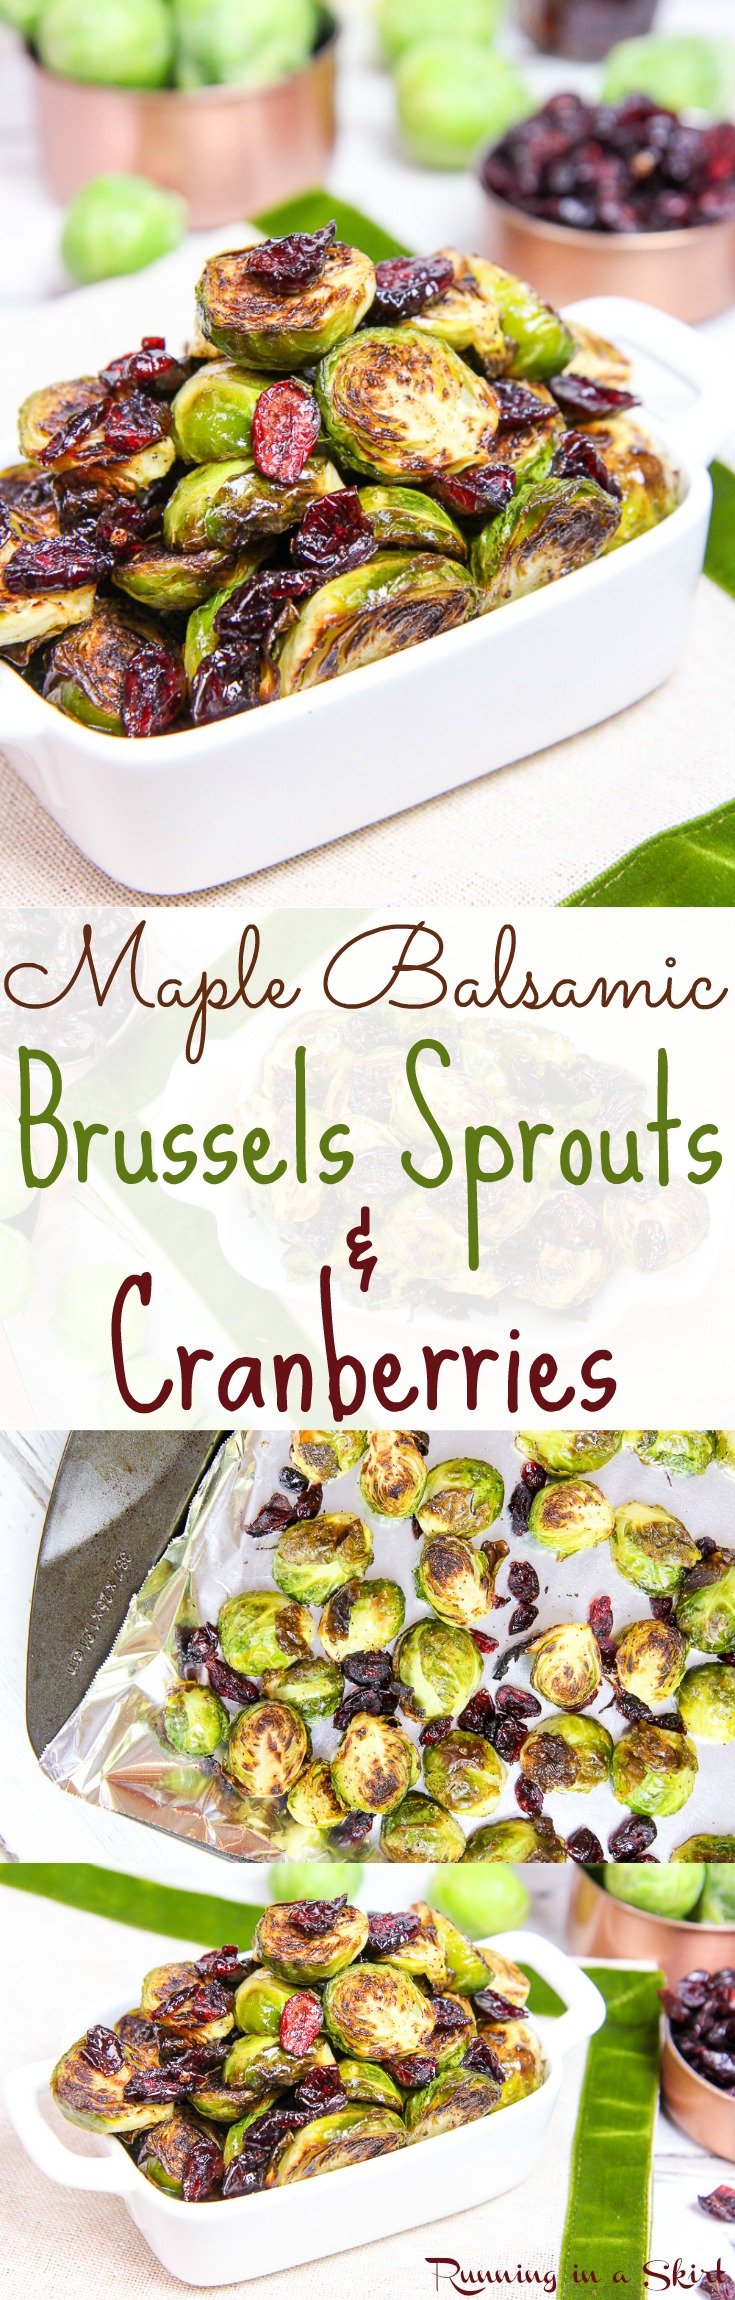 Maple Balsamic Brussels Sprouts and Cranberries recipe. Great for a healthy Thanksgiving side dish or Christmas dinner but easy enough for a weekday dinner. The best crispy, oven roasted sprouts recipe with maple syrup! Vegan, vegetarian, gluten free. / Running in a Skirt via @juliewunder